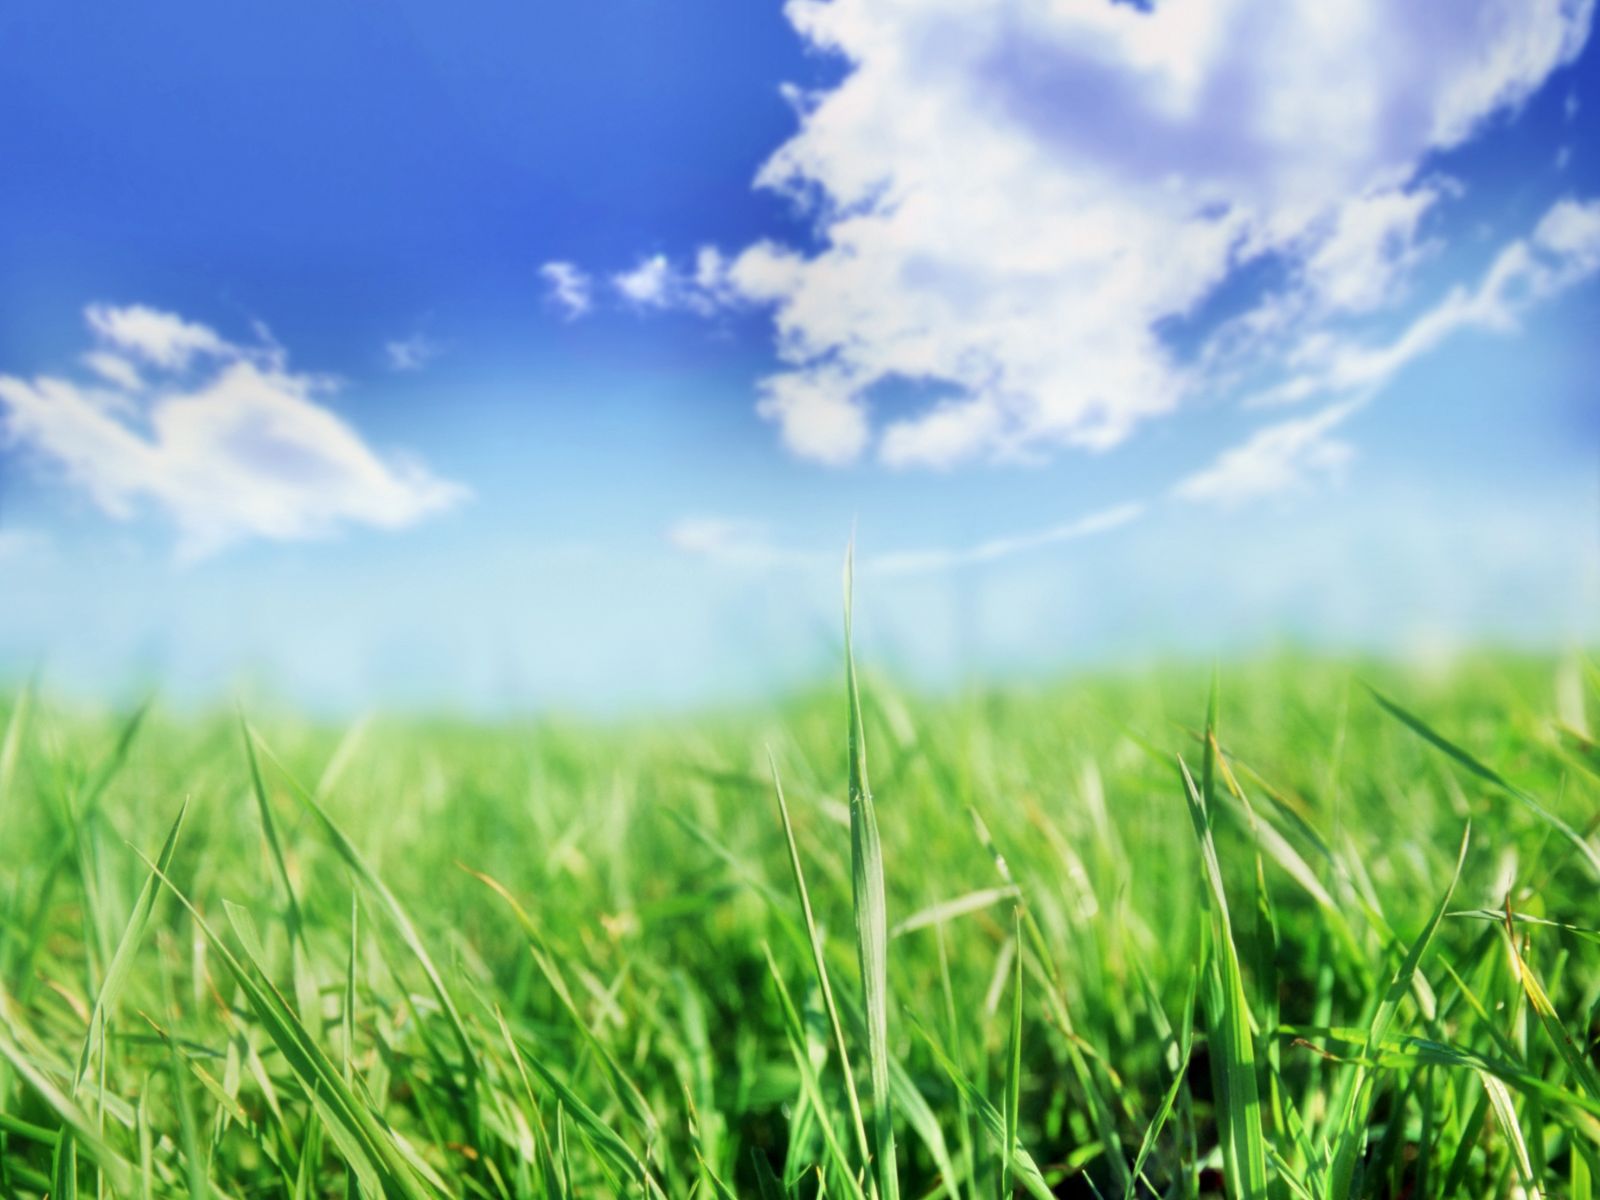 grass wallpaper,sky,people in nature,natural landscape,nature,grass